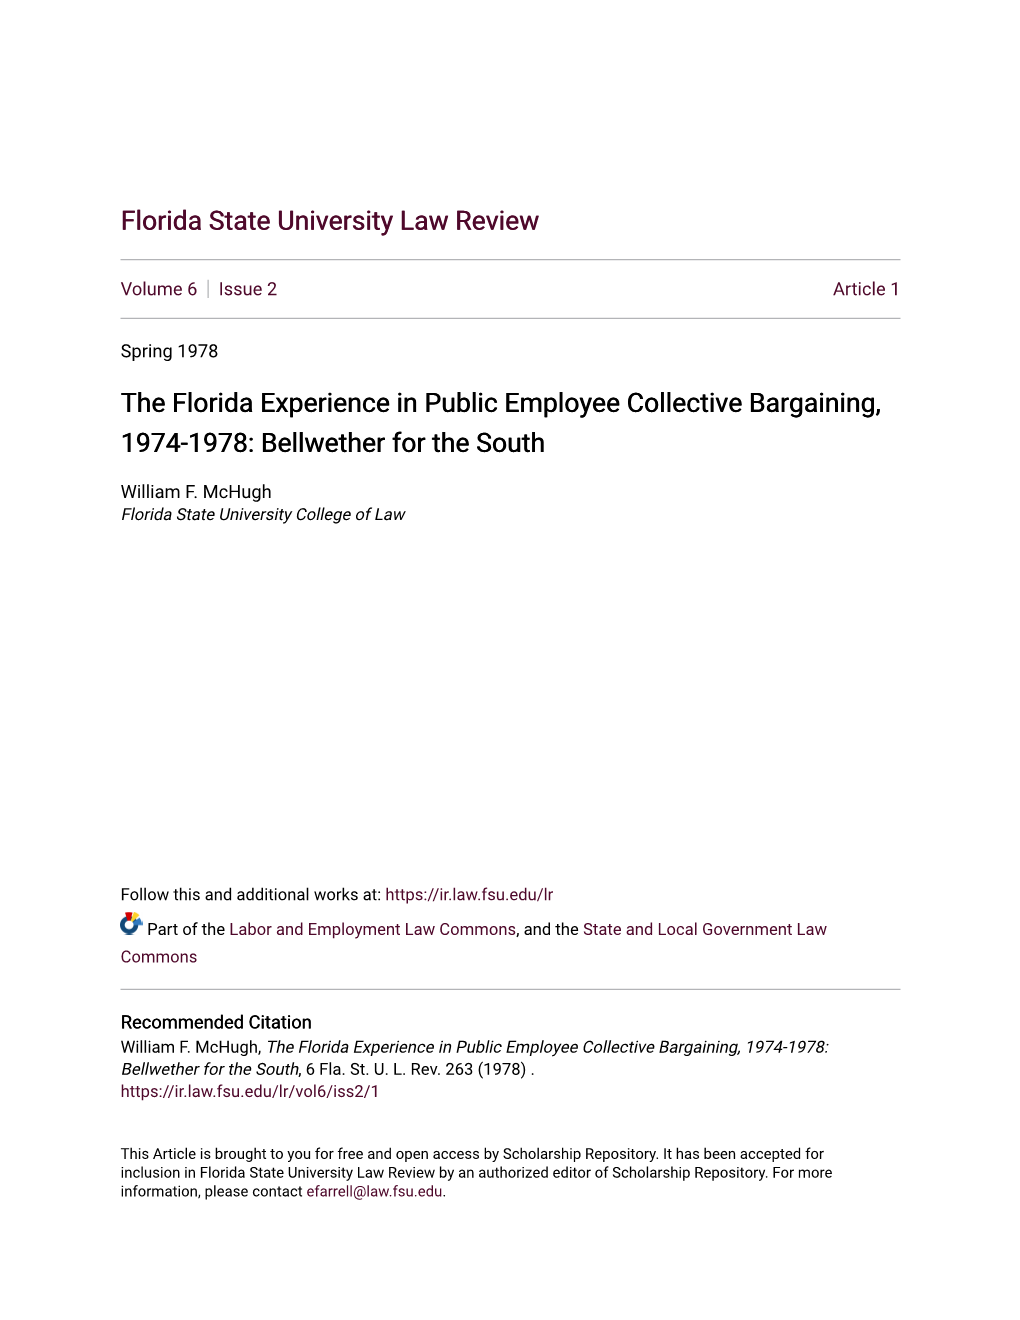 The Florida Experience in Public Employee Collective Bargaining, 1974-1978: Bellwether for the South